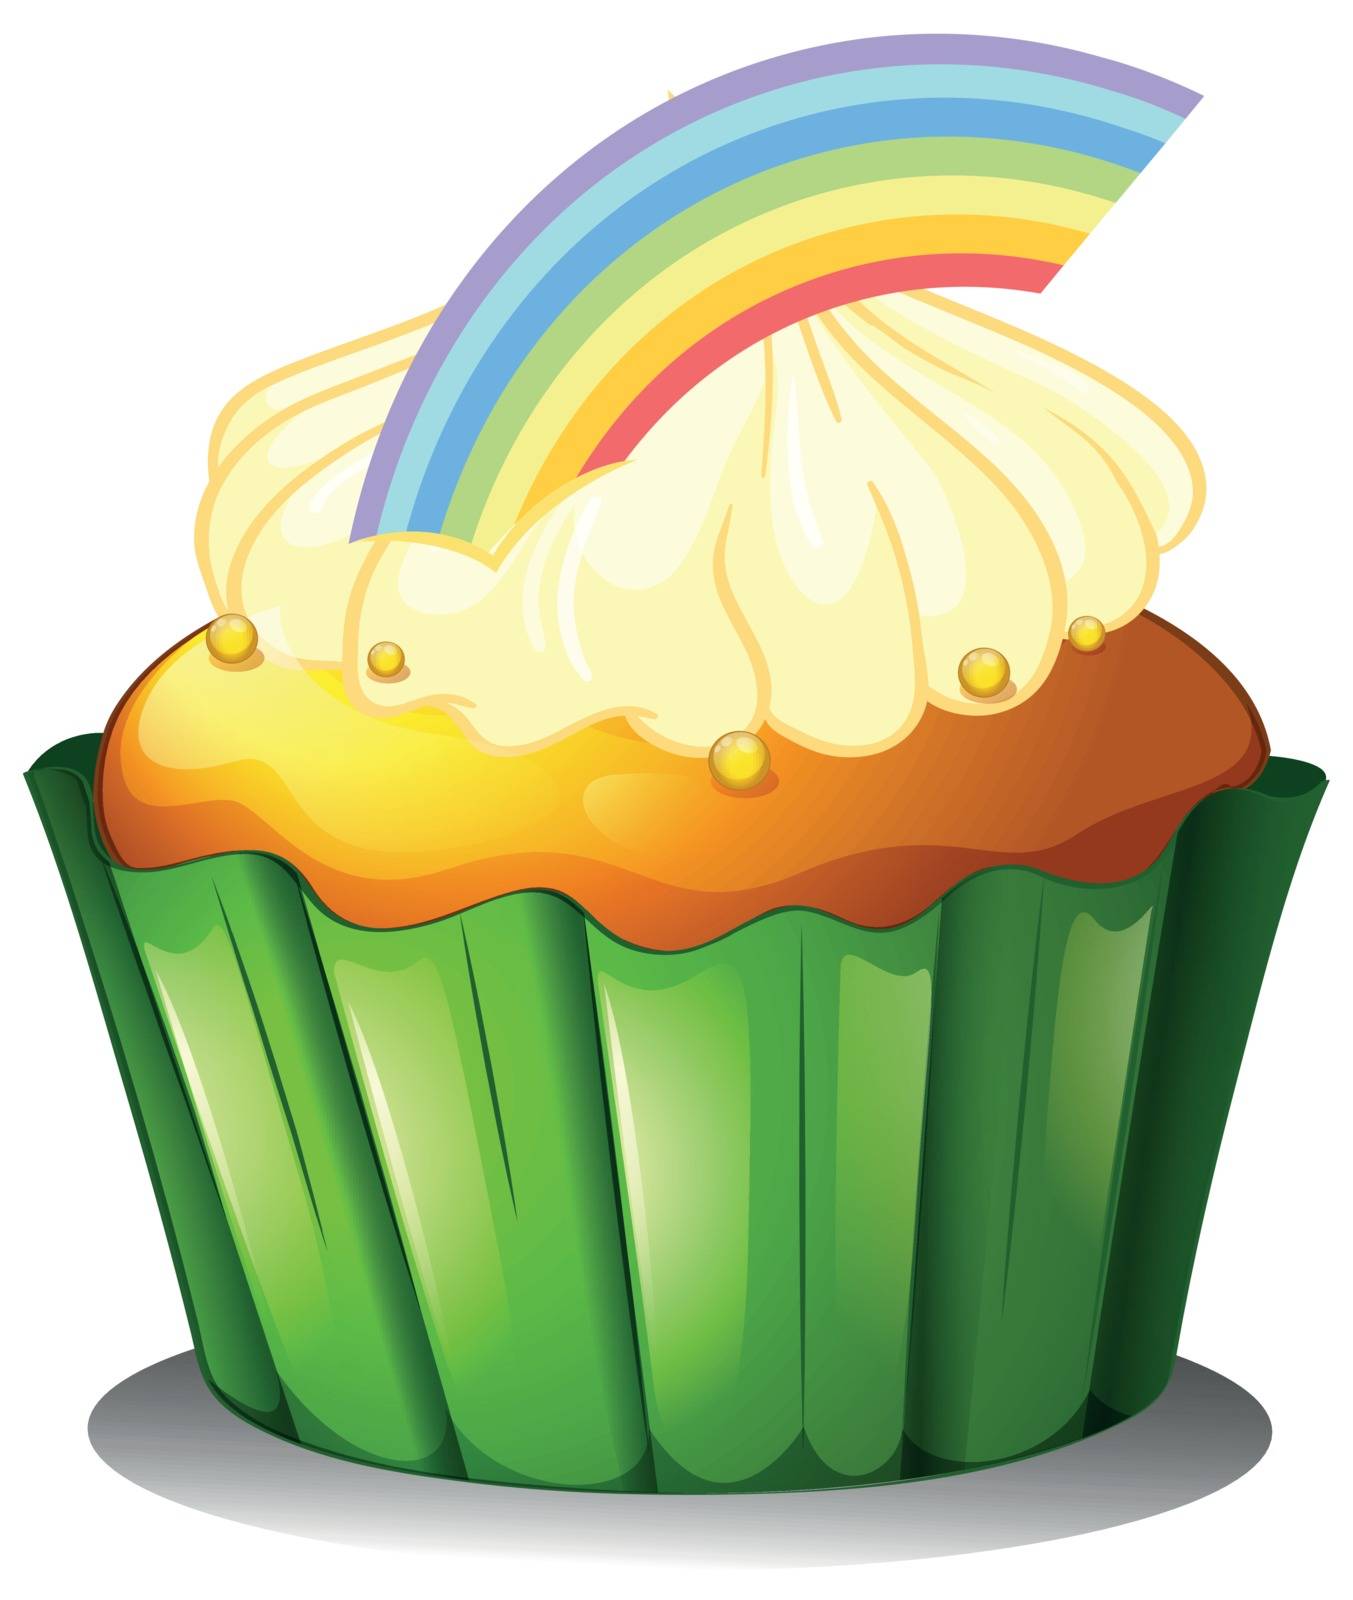 A cupcake with rainbow by iimages